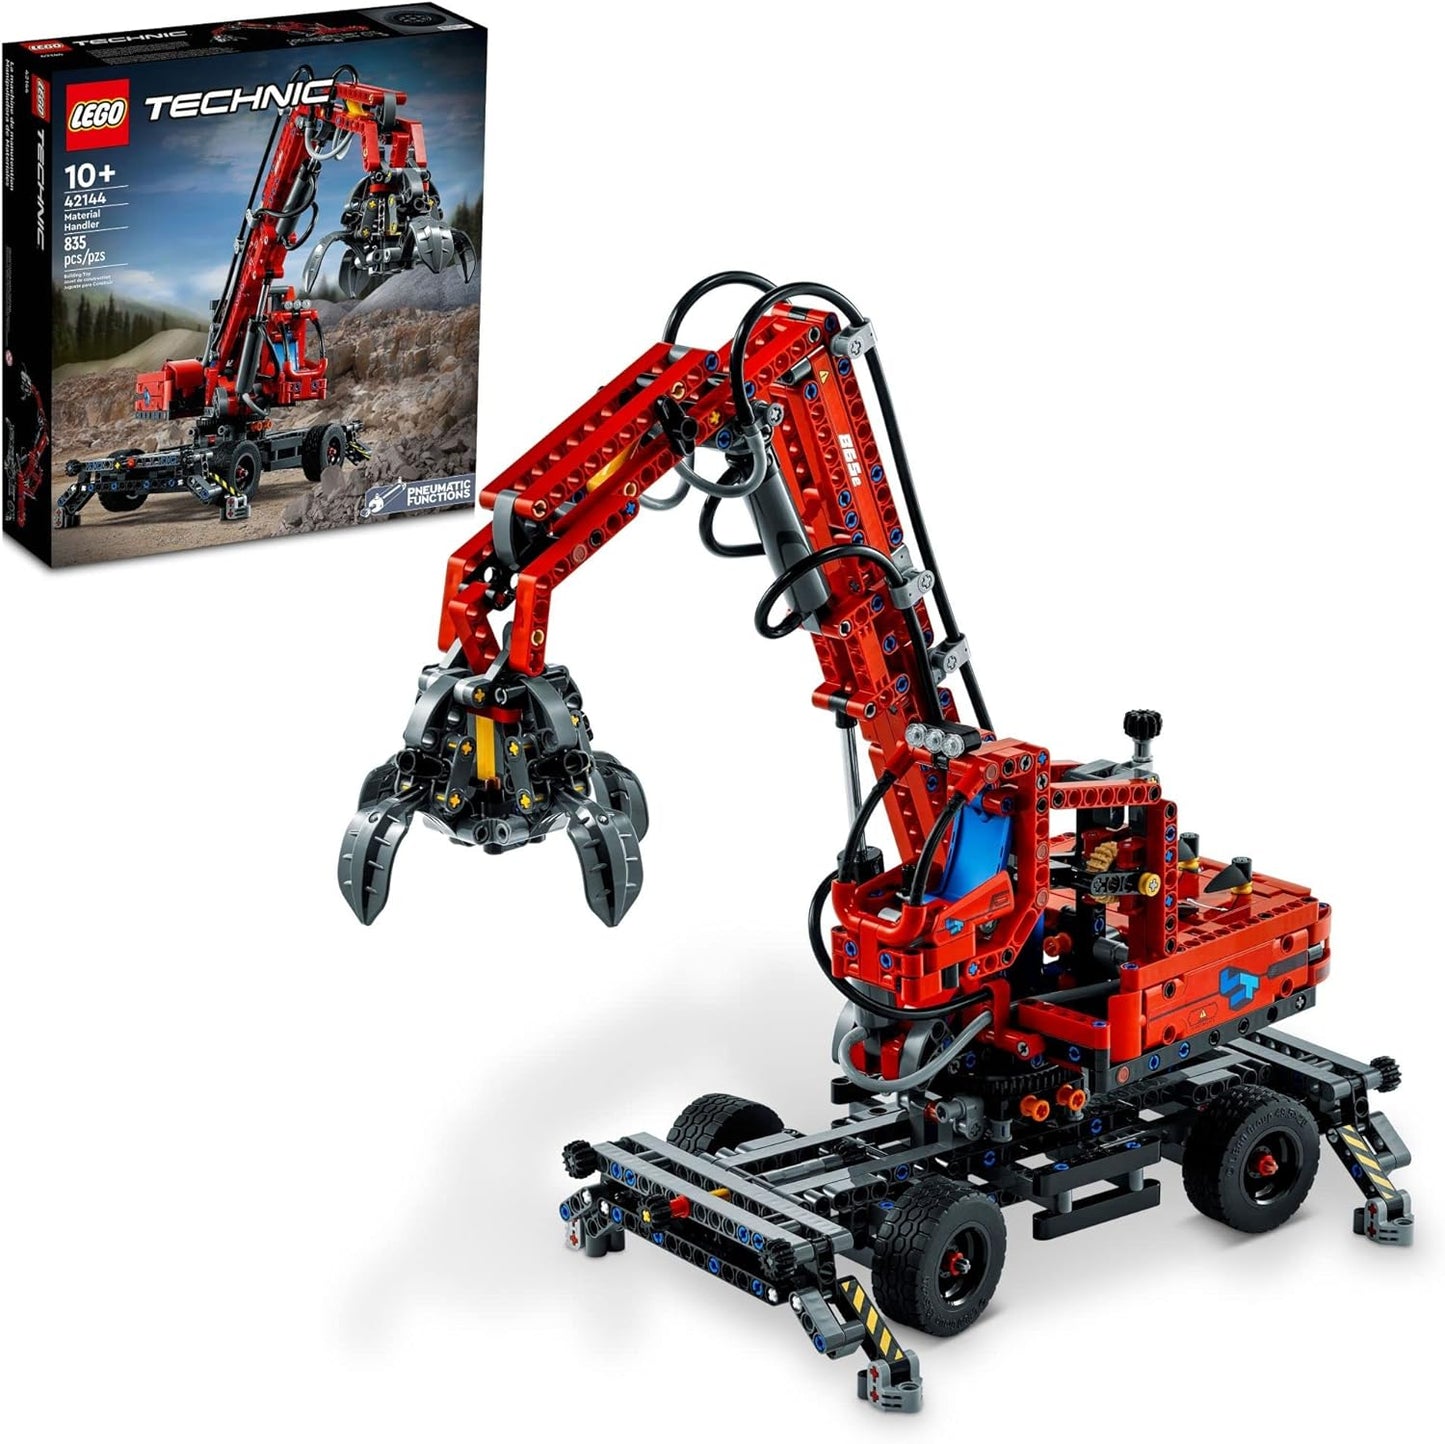 LEGO Technic Material Handler 42144, Mechanical Model Crane Toy, with Manual and Pneumatic Functions, Construction Truck Building Set, Educational Toys